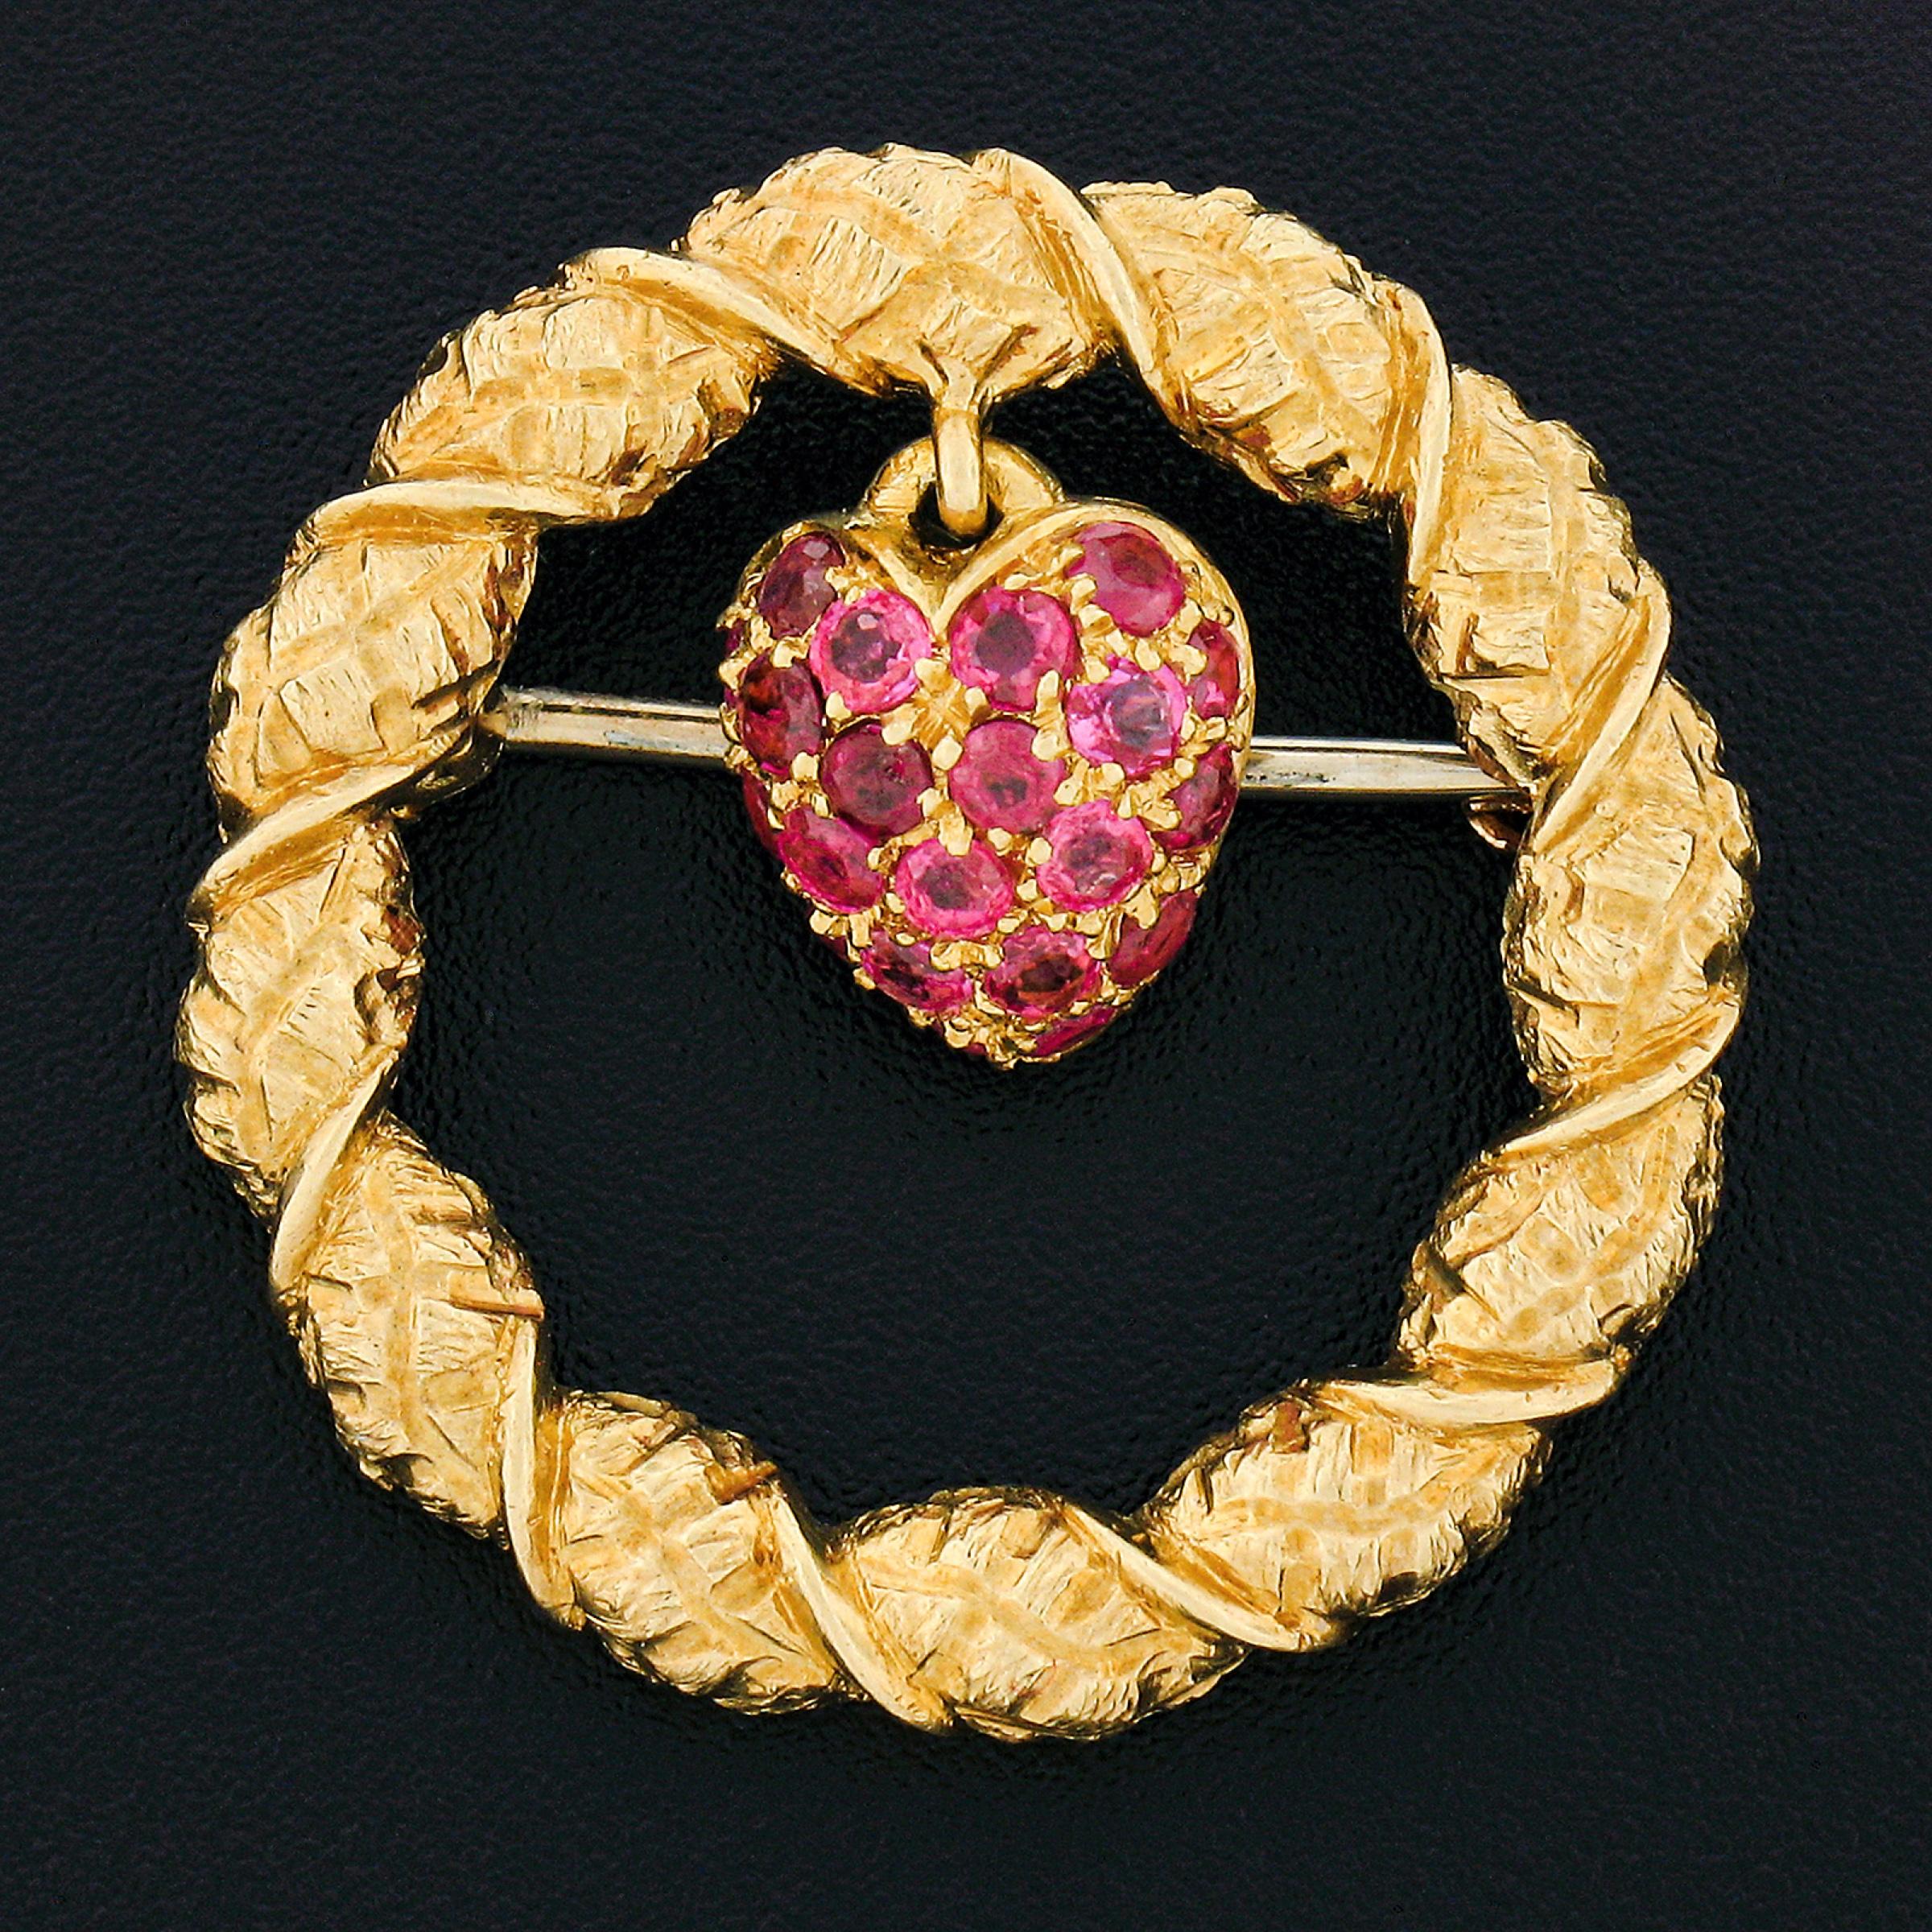 This wonderful vintage brooch by Tiffany & Co. is crafted in solid 18k yellow gold and features a truly elegant circle wreath design that is structured from uniquely textured gold throughout. A cute strawberry or heart ruby charm dangles from the